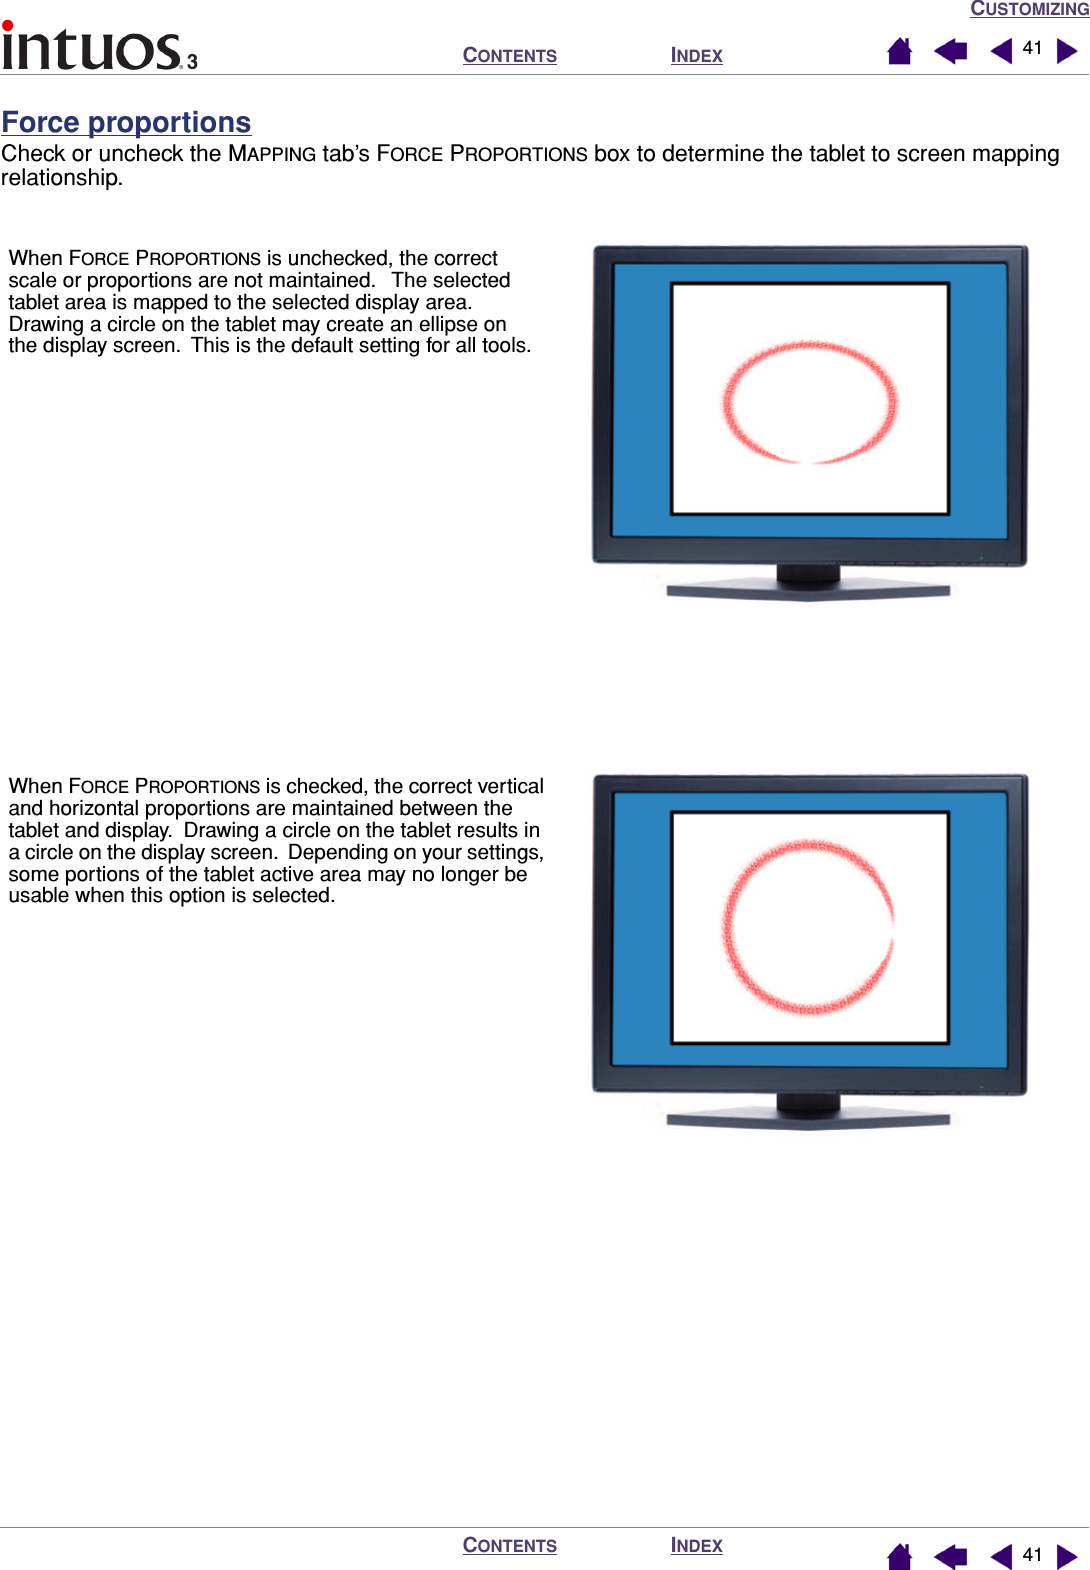 CUSTOMIZINGINDEXCONTENTSINDEXCONTENTS 4141Force proportionsCheck or uncheck the MAPPING tab’s FORCE PROPORTIONS box to determine the tablet to screen mapping relationship.When FORCE PROPORTIONS is checked, the correct vertical and horizontal proportions are maintained between the tablet and display.  Drawing a circle on the tablet results in a circle on the display screen.  Depending on your settings, some portions of the tablet active area may no longer be usable when this option is selected.When FORCE PROPORTIONS is unchecked, the correct scale or proportions are not maintained.   The selected tablet area is mapped to the selected display area.  Drawing a circle on the tablet may create an ellipse on the display screen.  This is the default setting for all tools.